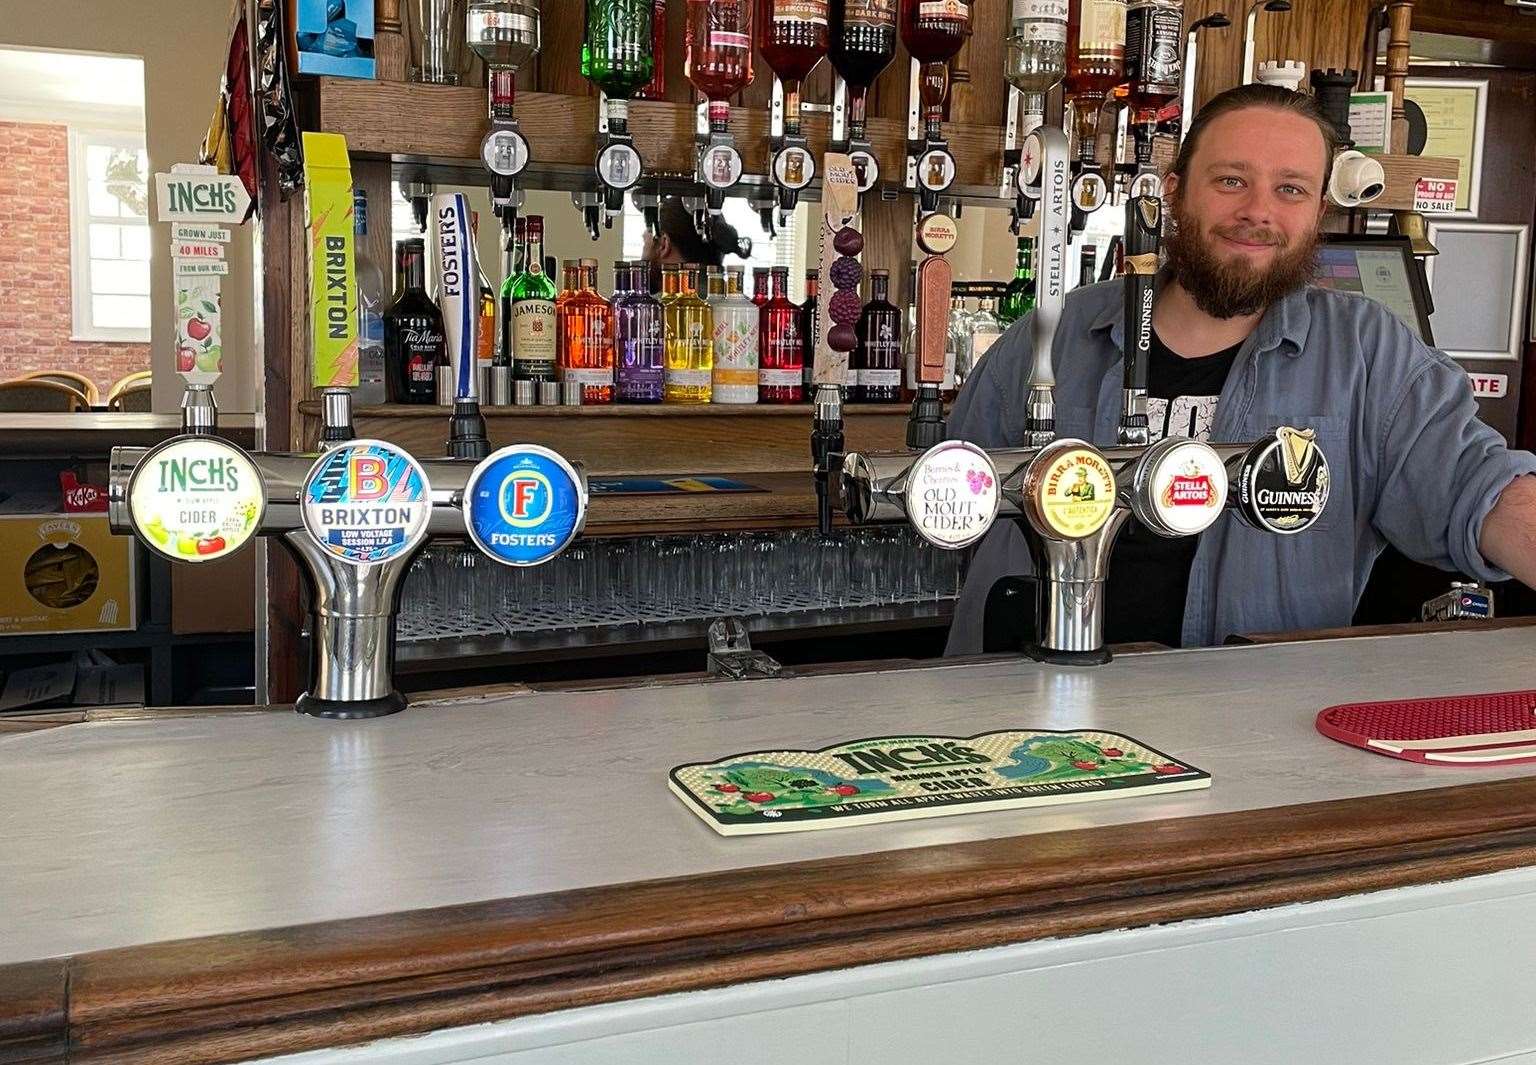 The Castle Tavern in Sheerness has recently reopened after closing due to the pandemic